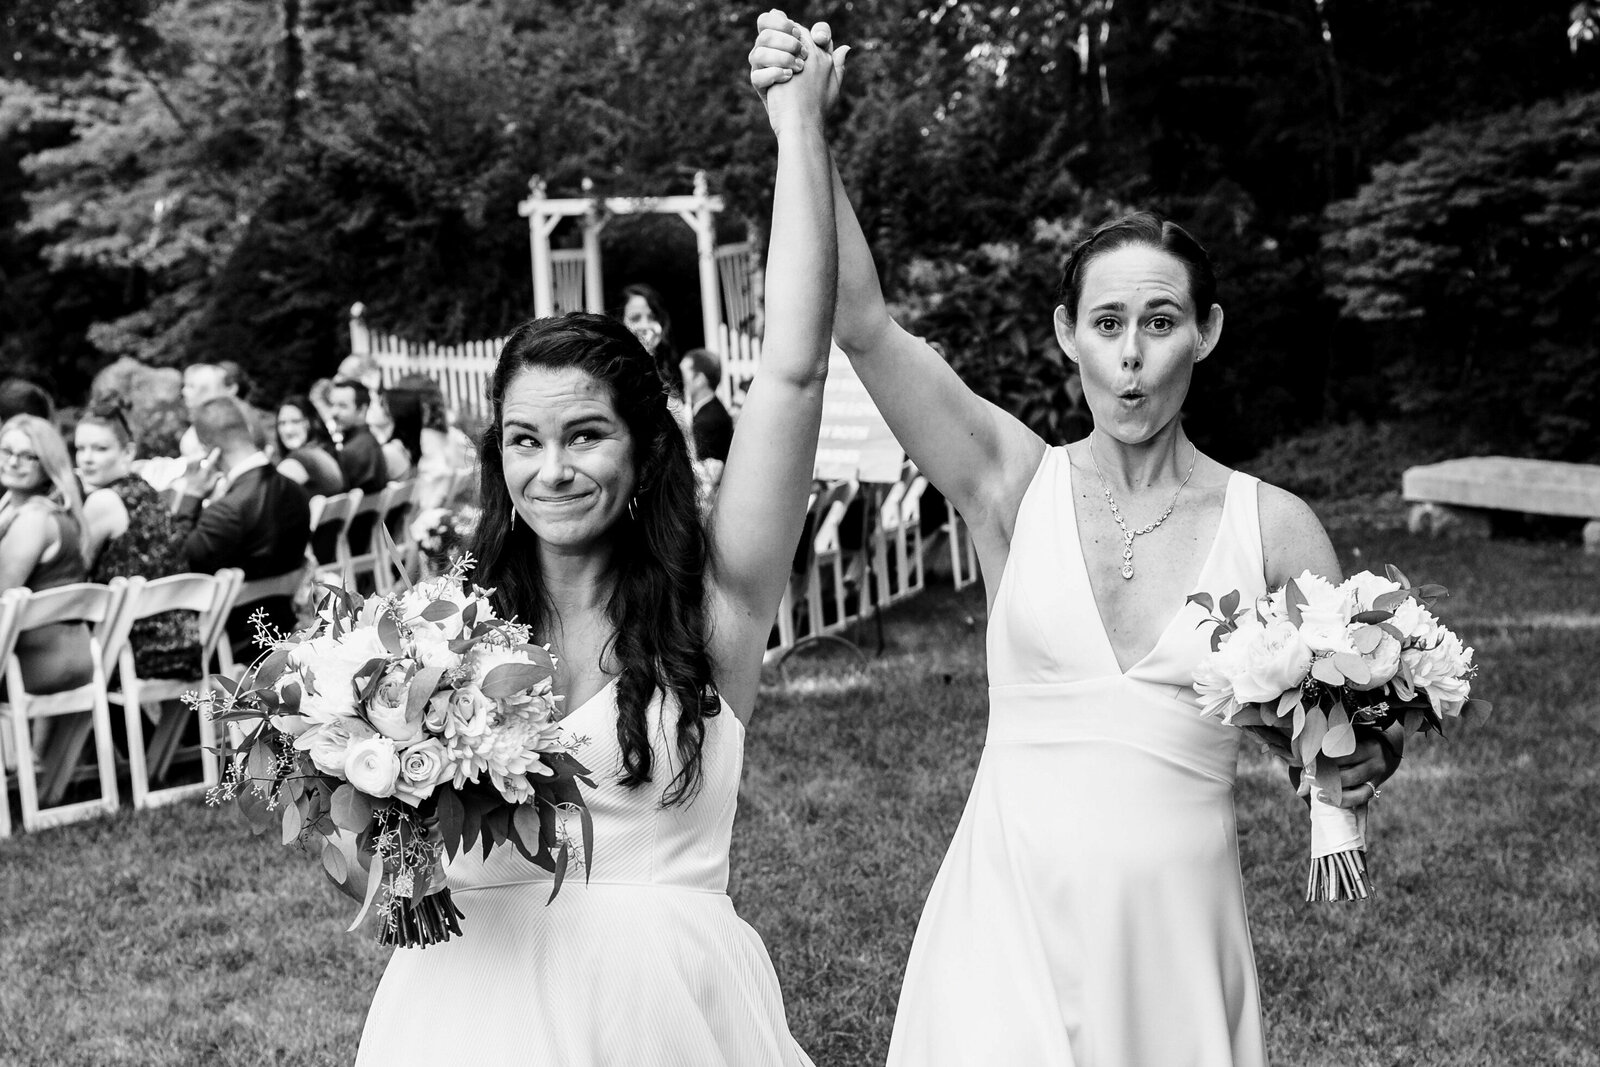 black and white image of two brides making fun faces during recessional